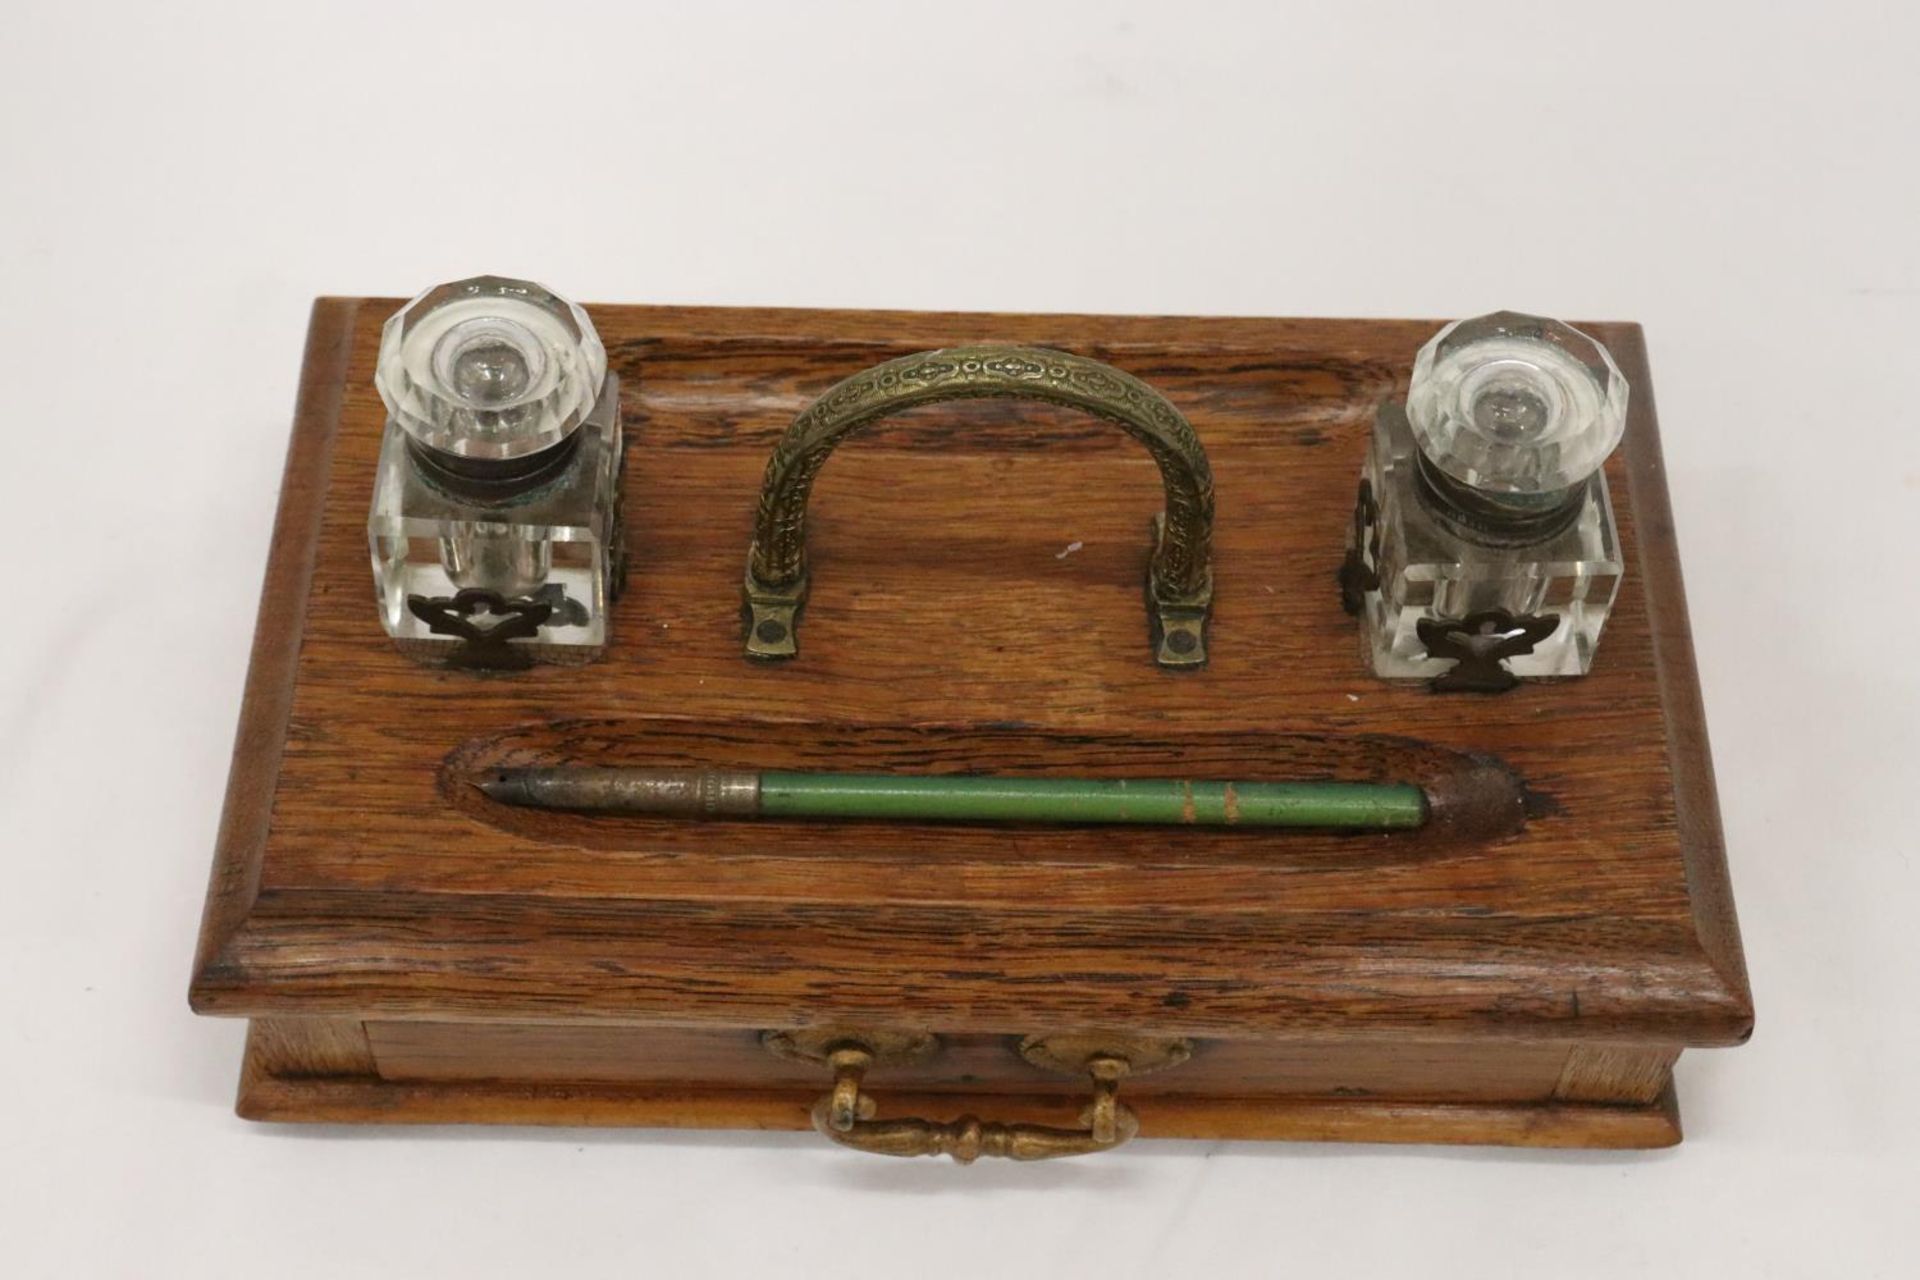 A VINTAGE OAK DESKSET WITH BRASS HANDLE AND DRAWER WITH GLASS INKWELLS - Image 2 of 6